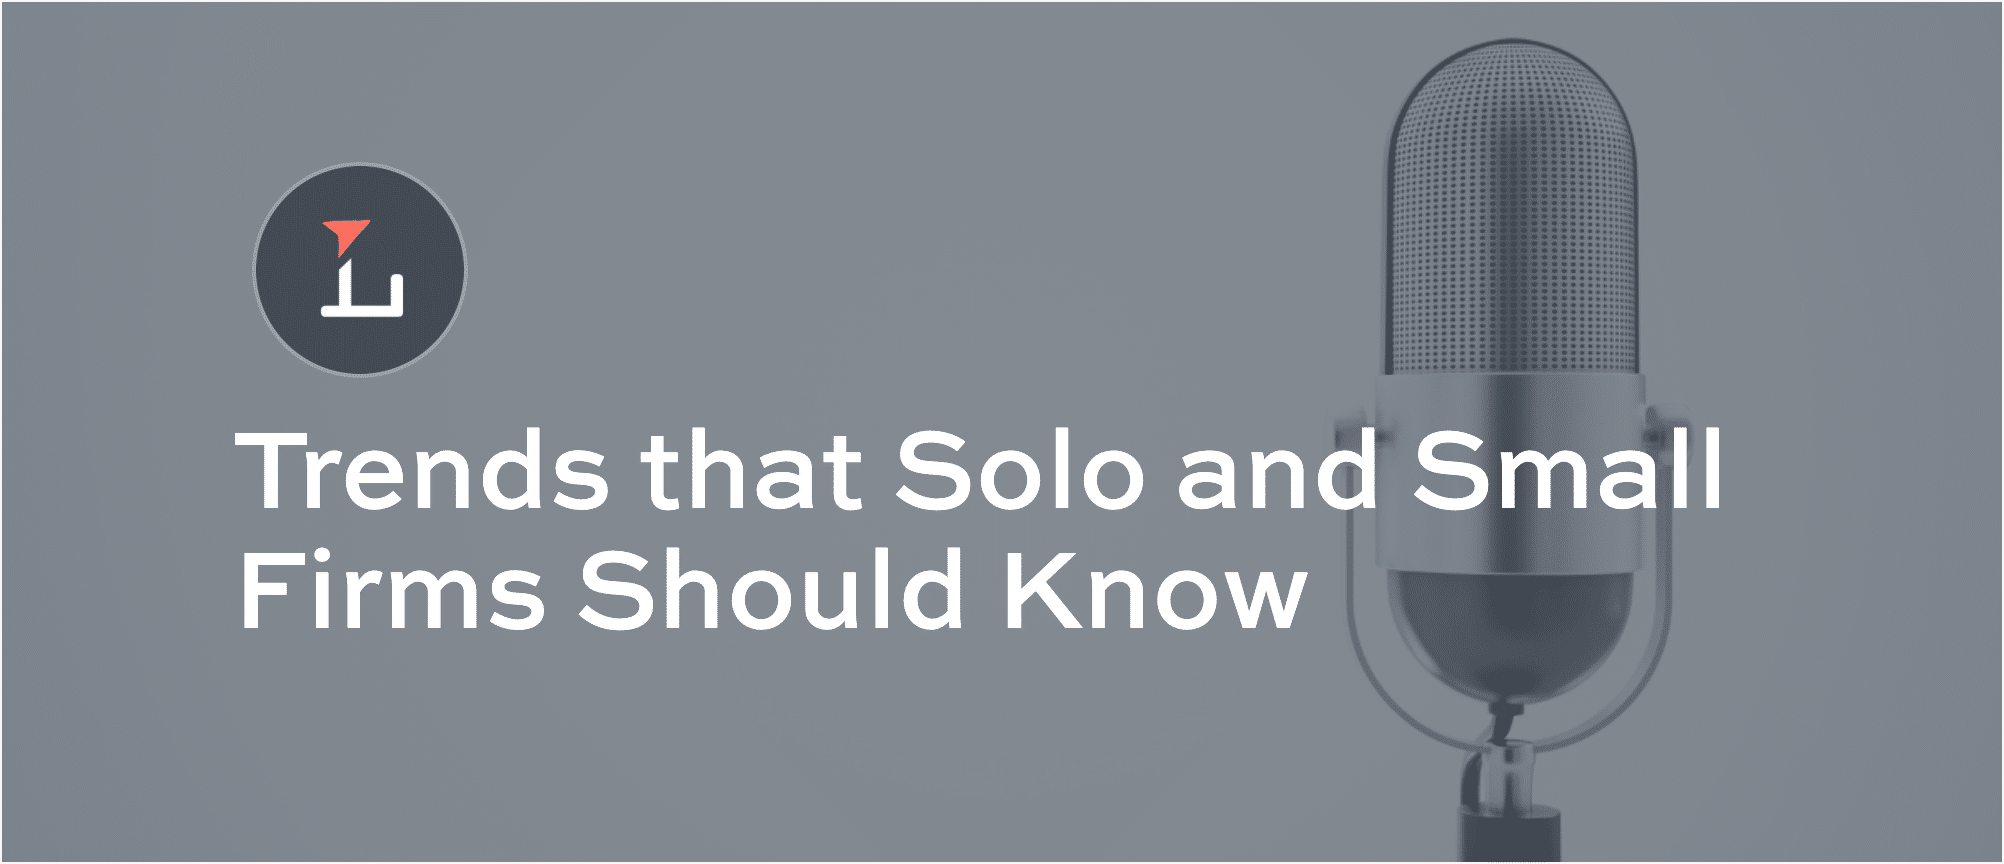 Trends that Solo and Small Firms Should Know